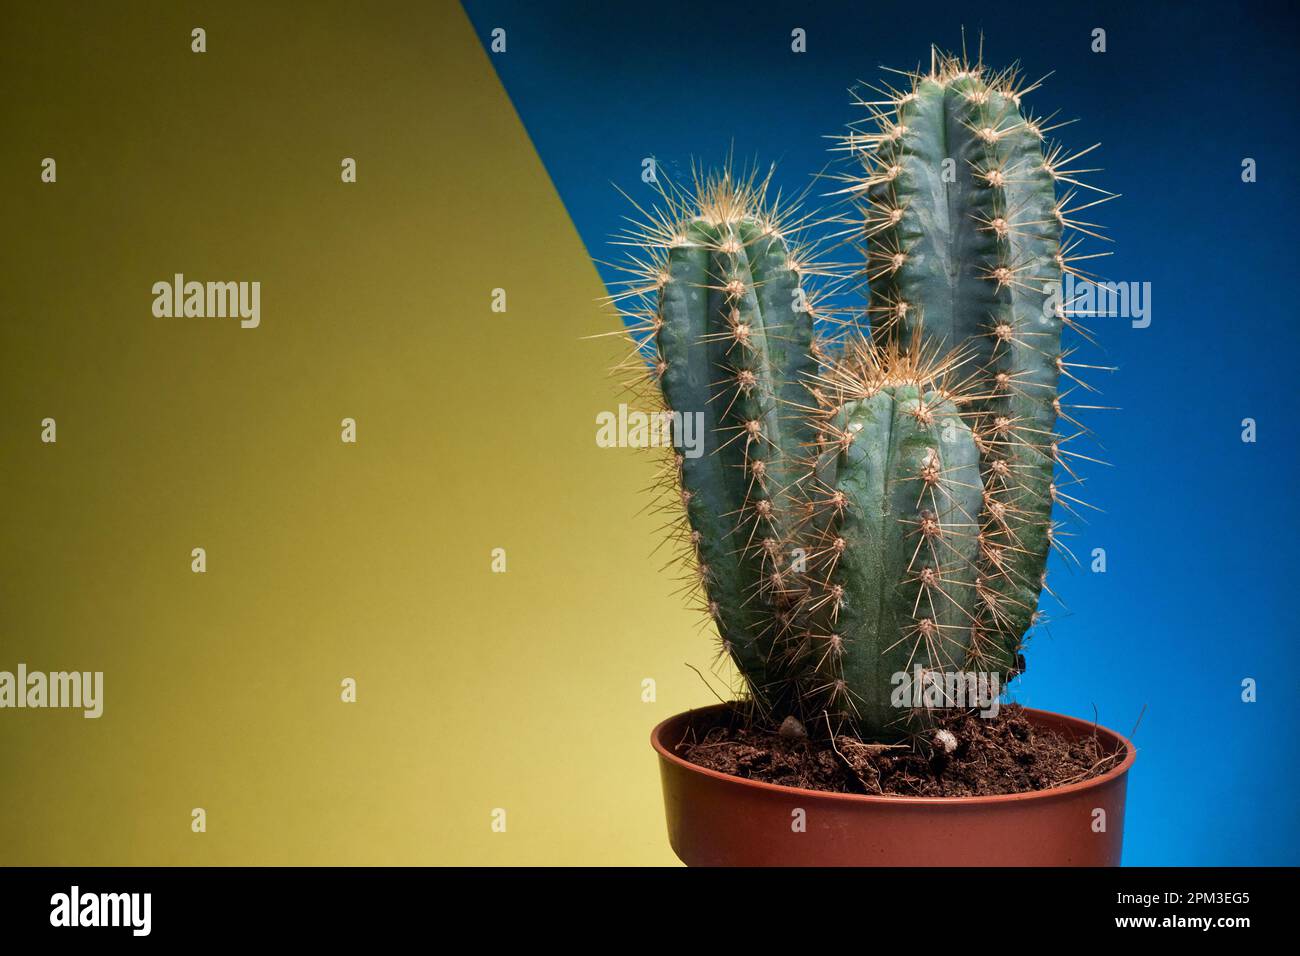 Close-up view of a cactus in the pot under the light in front of yellow-blue background. Natural, cactus, houseplant Stock Photo